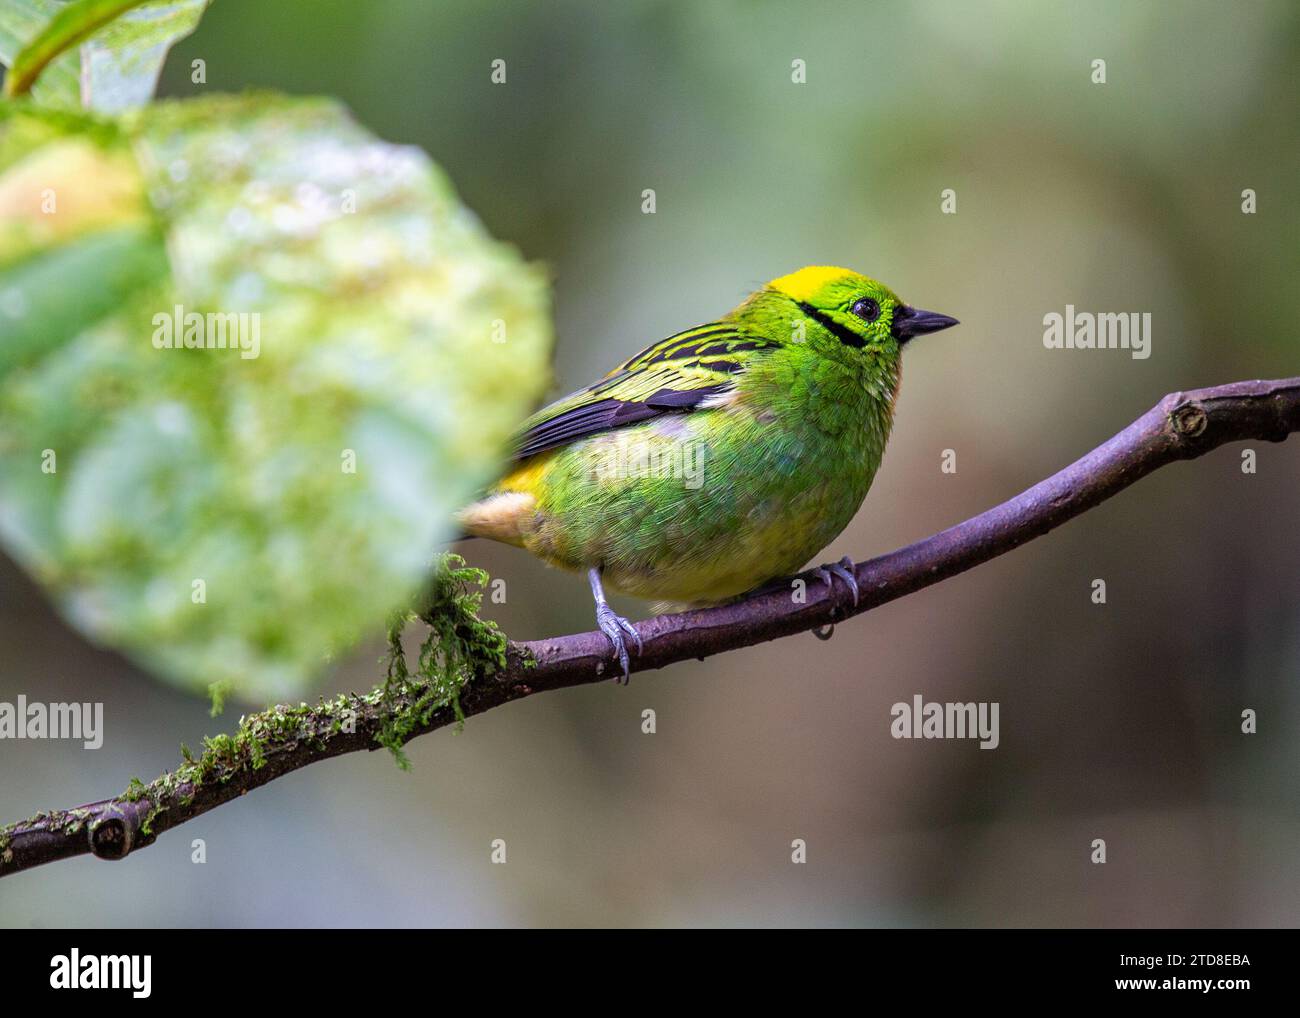 The resplendent Emerald Tanager (Tangara florida), a dazzling jewel in South American rainforests. With its vibrant green and blue plumage, this small Stock Photo